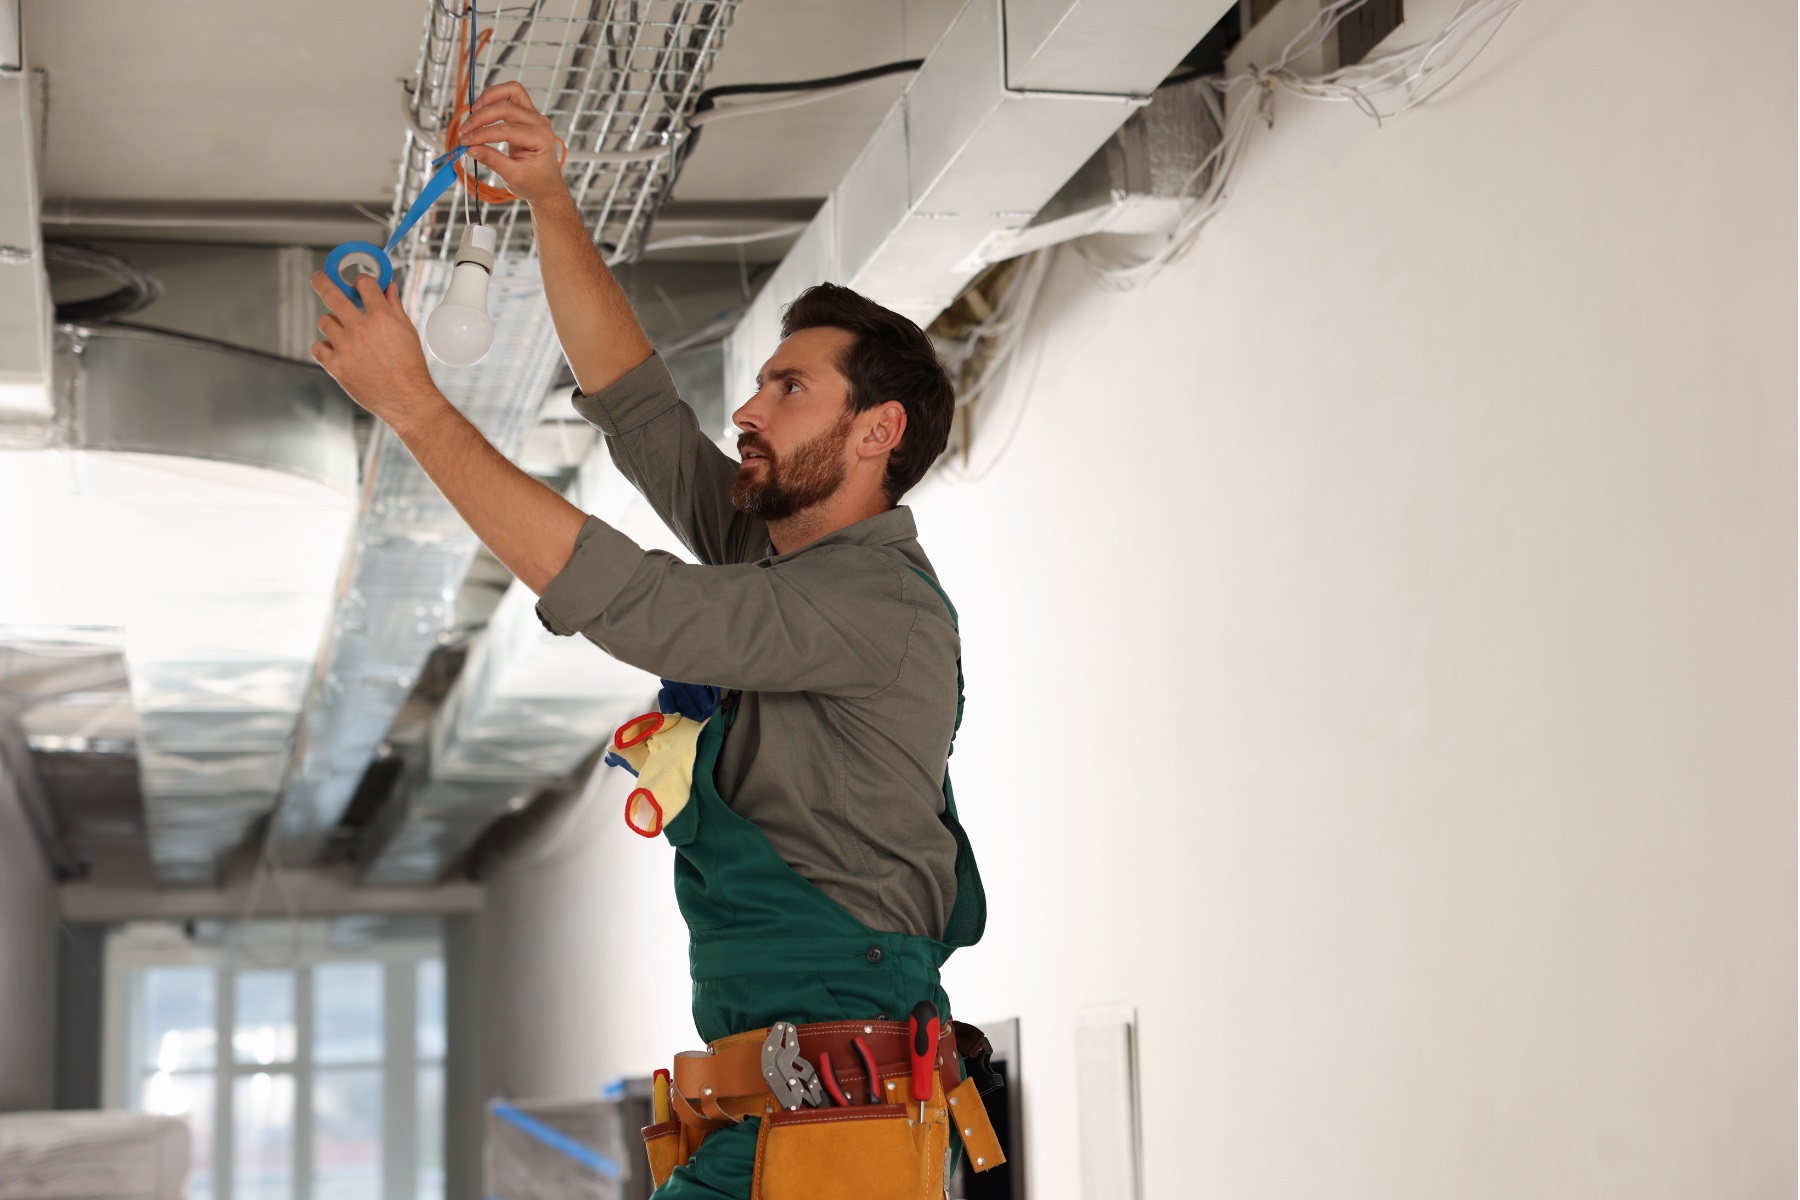 Photo of a male tradesman repairing a light in a building.